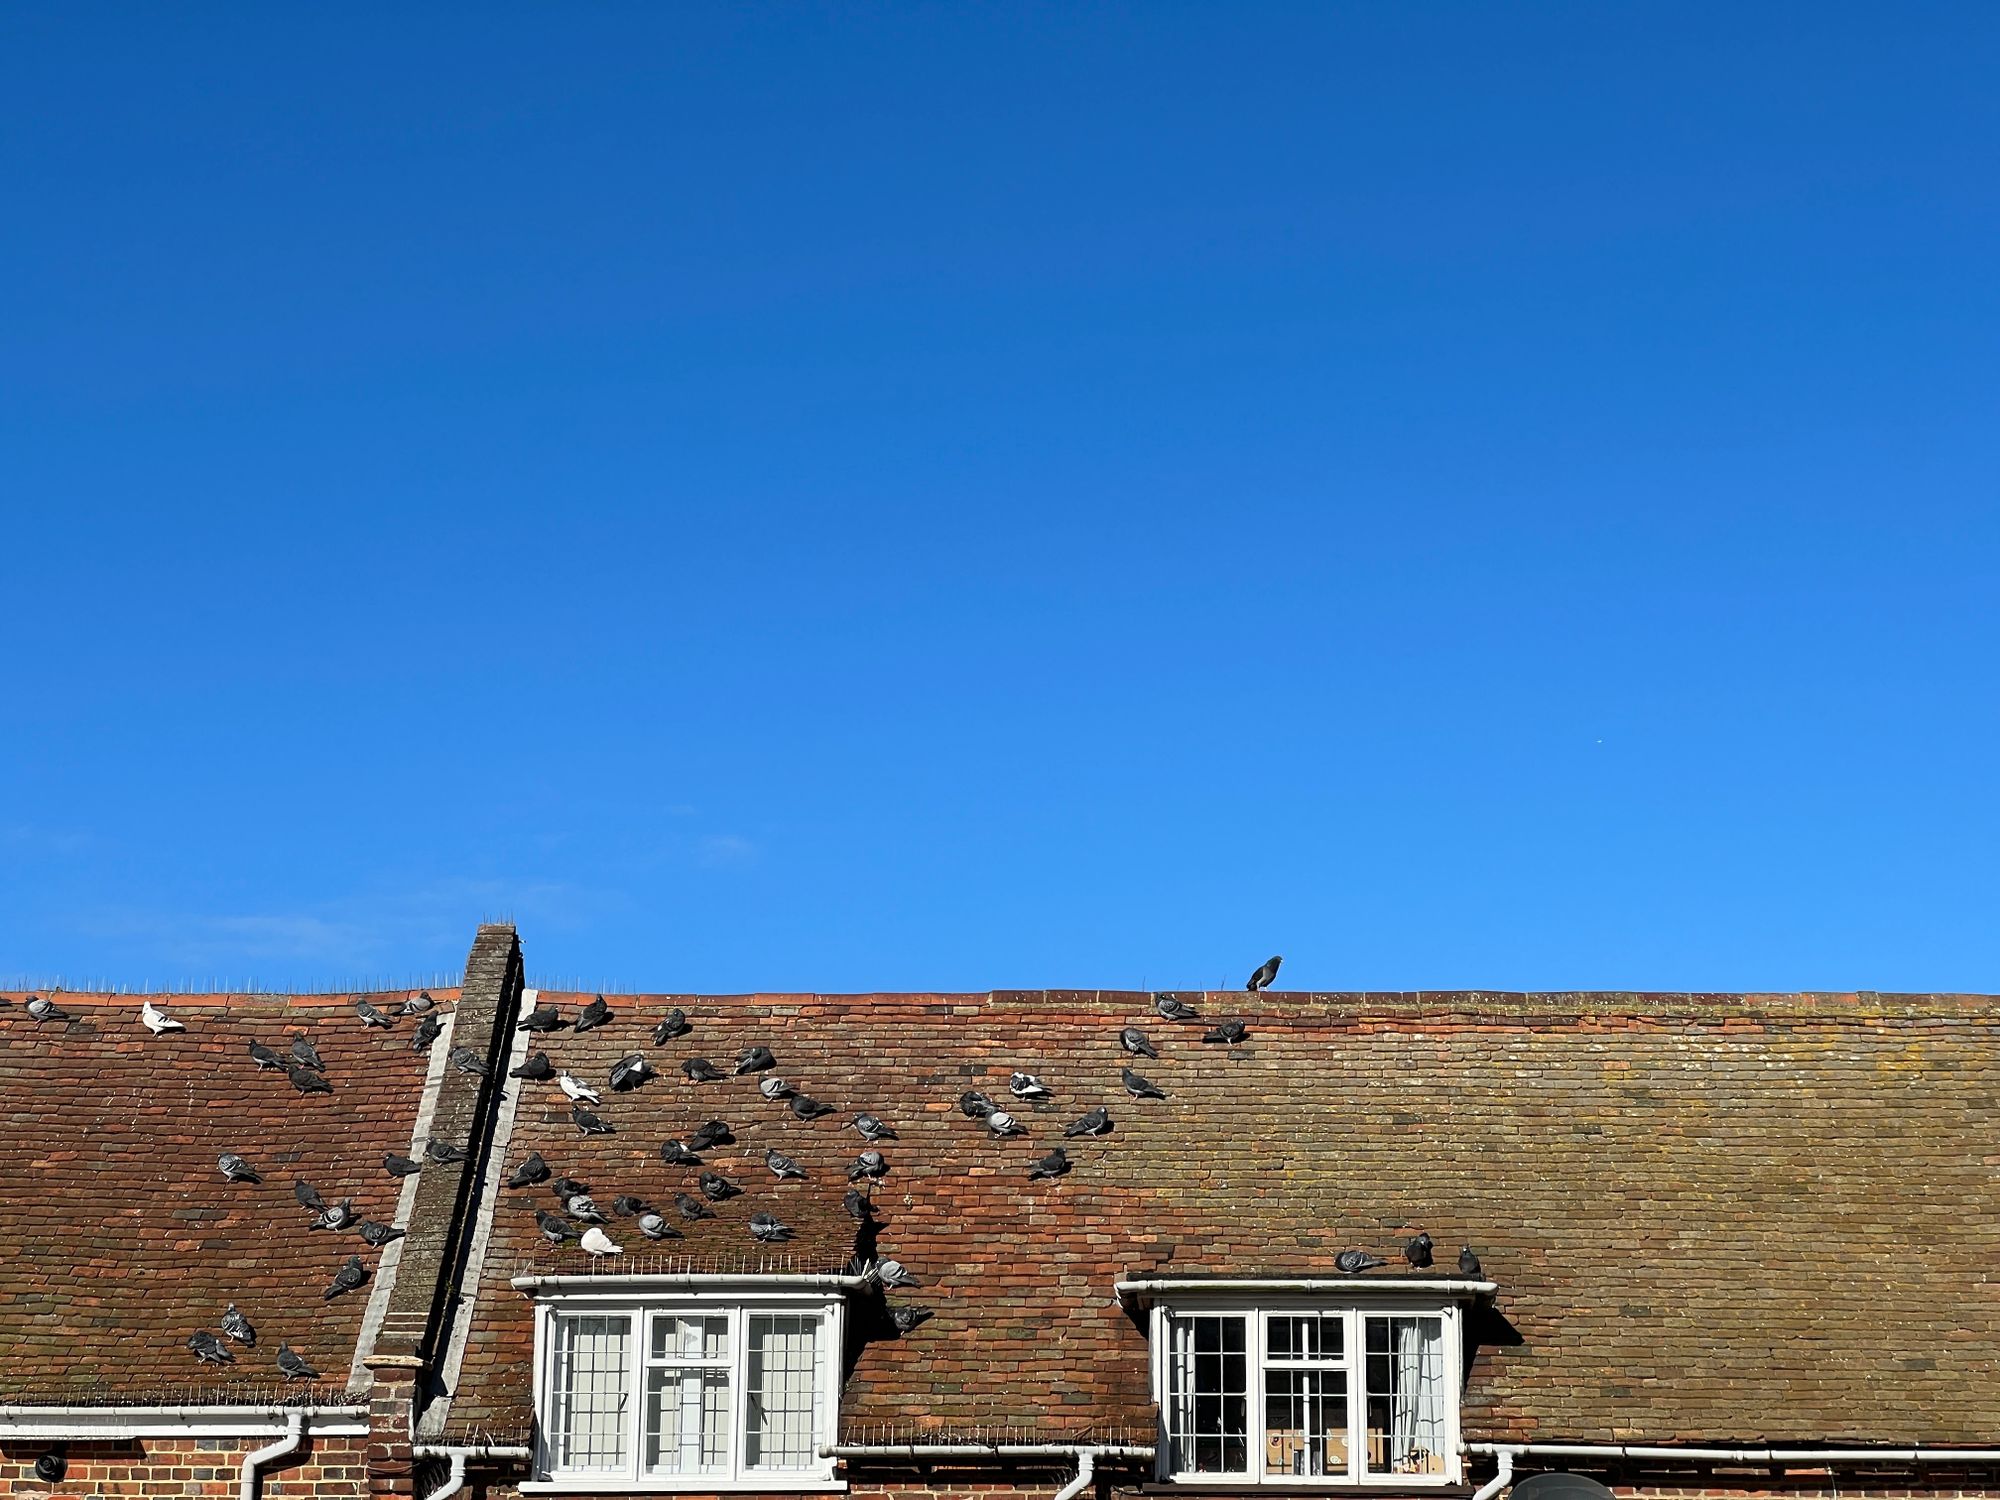 The tiled roof of some terraced houses on a clear day. A large group of pigeons sit on the roof, roosting.